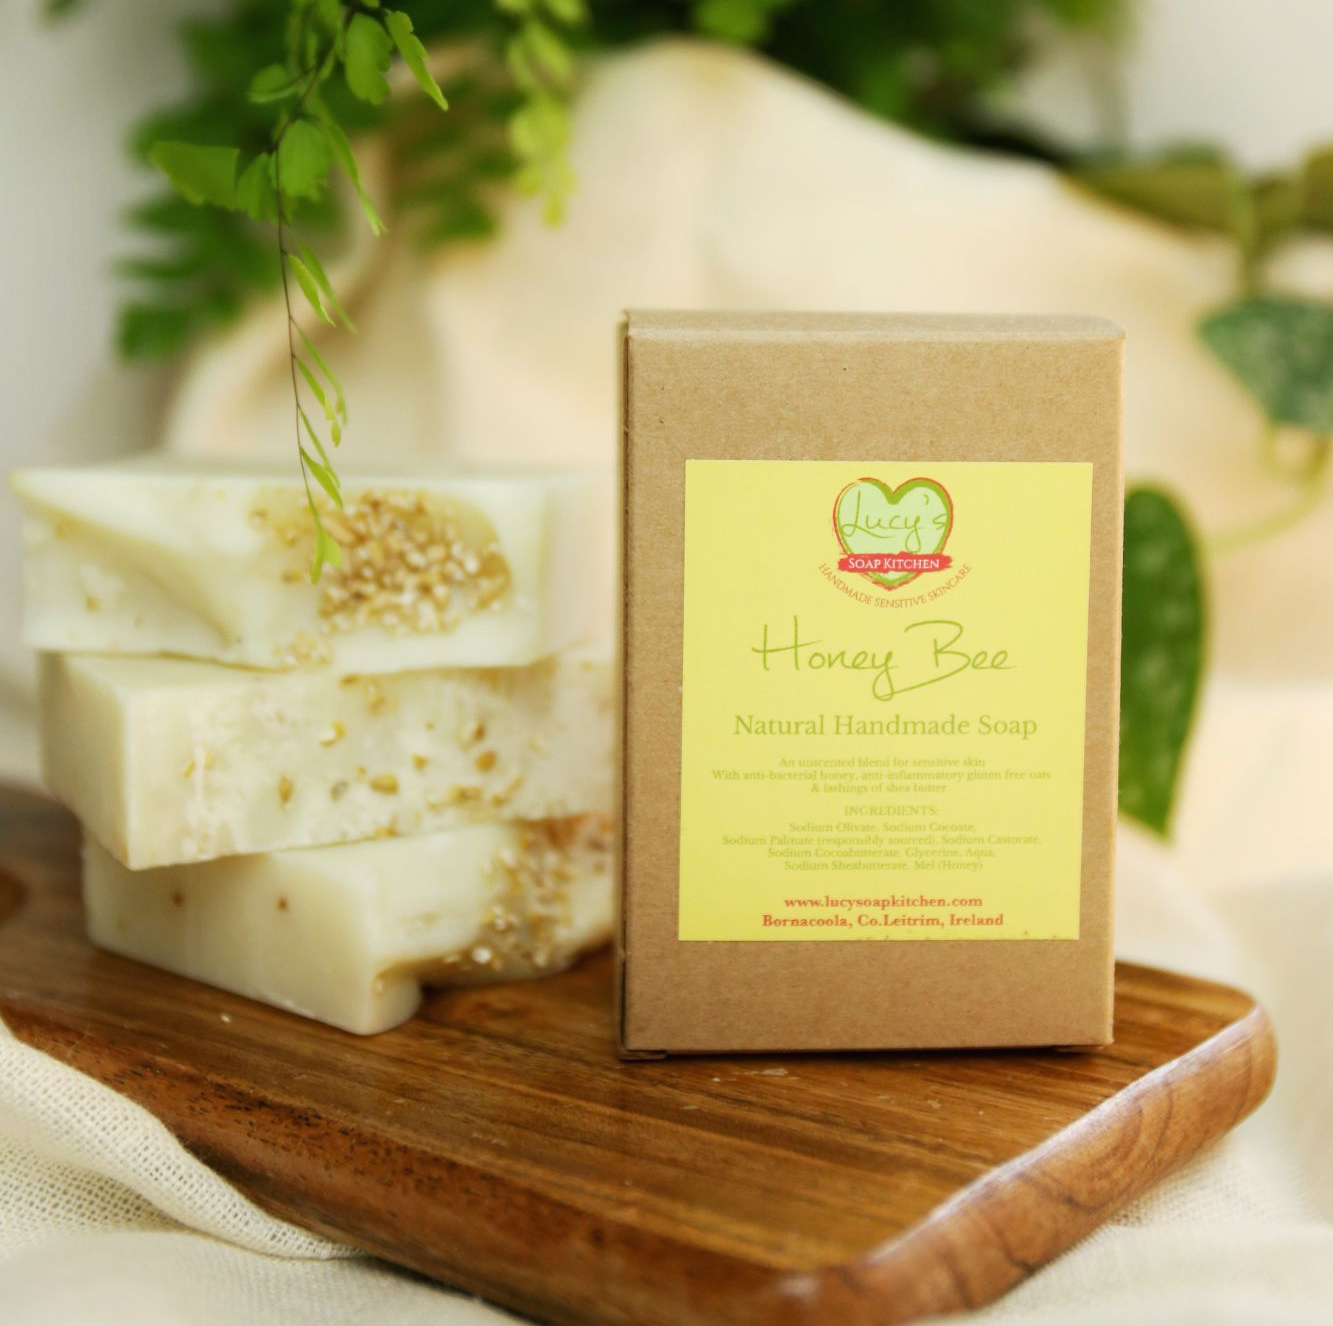 Irish made natural soap with honey, gluten free oats and shea butter| Lucy's Soap Kitchen| Leitrim